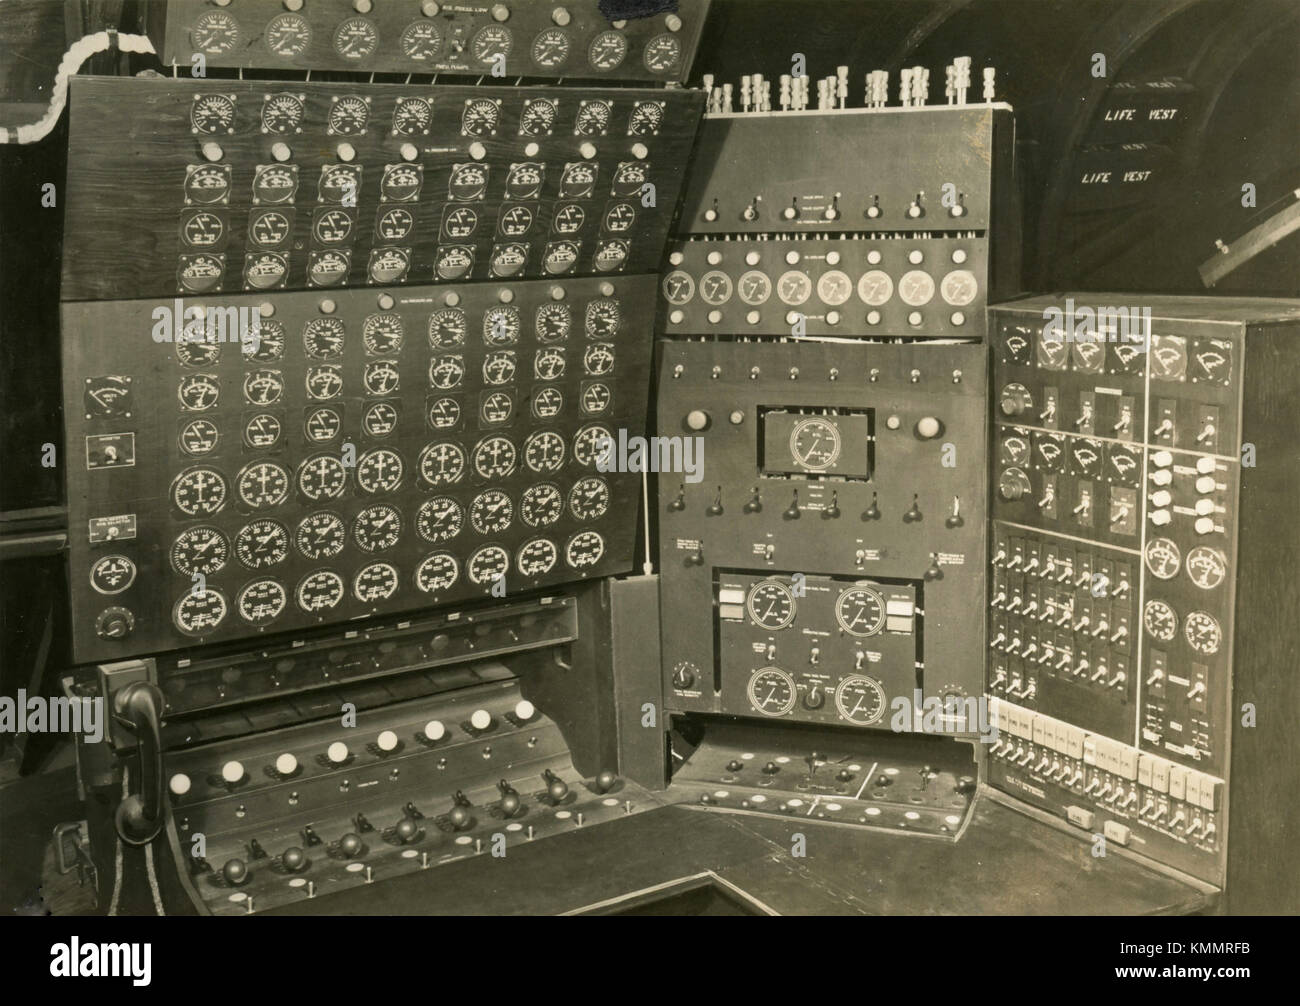 Engine control panel of an aircraft, 1940s Stock Photo